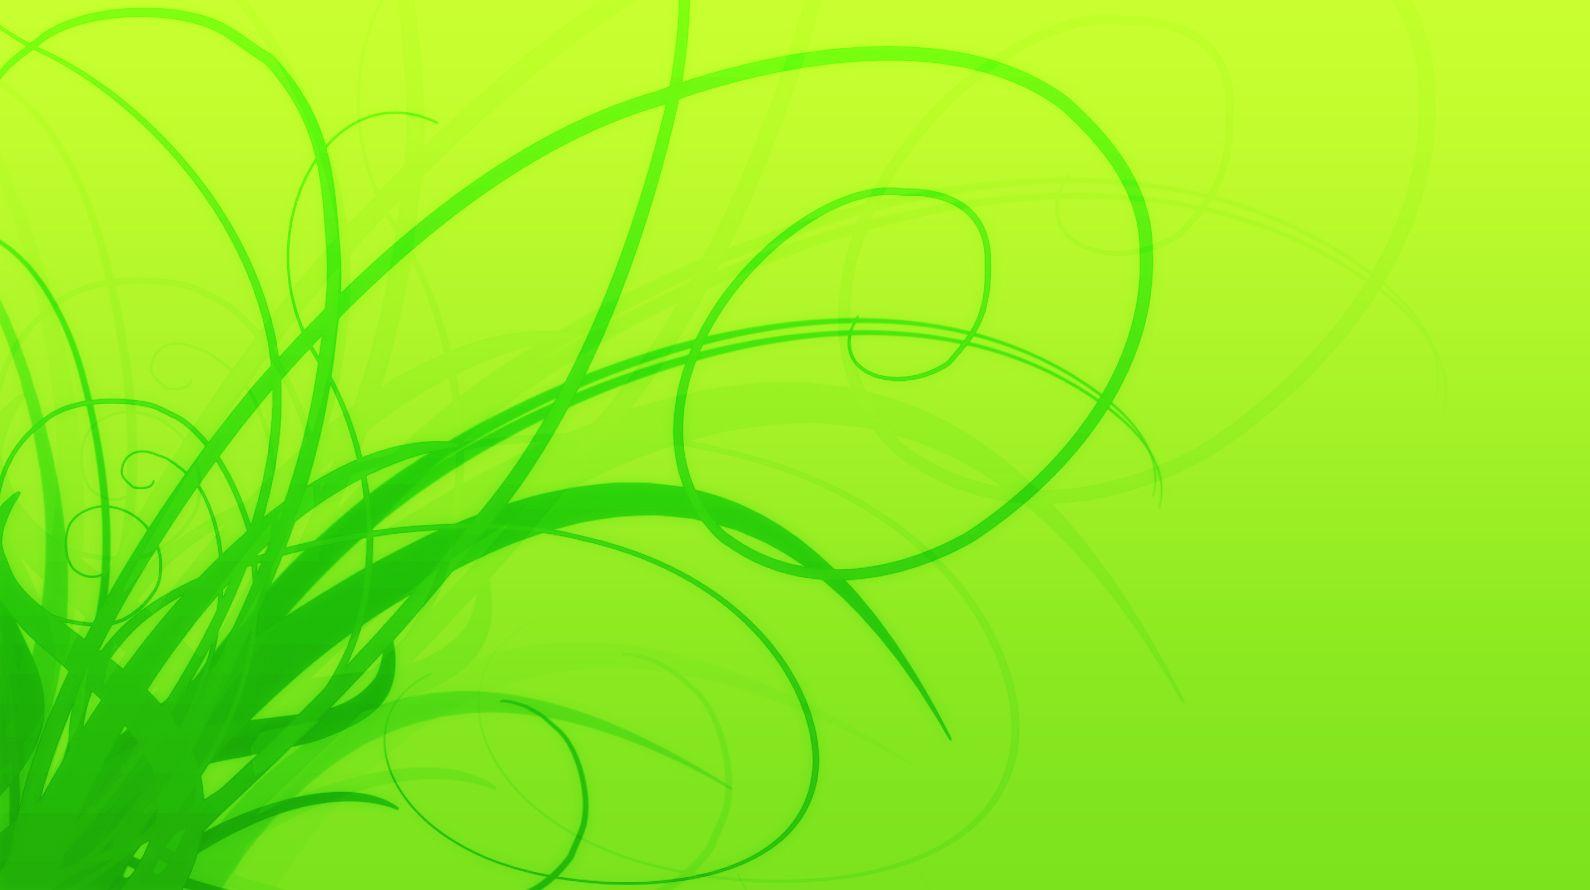 Free Bright Neon Green Foliage Swirls Wallpapers from BackgroundsEtc